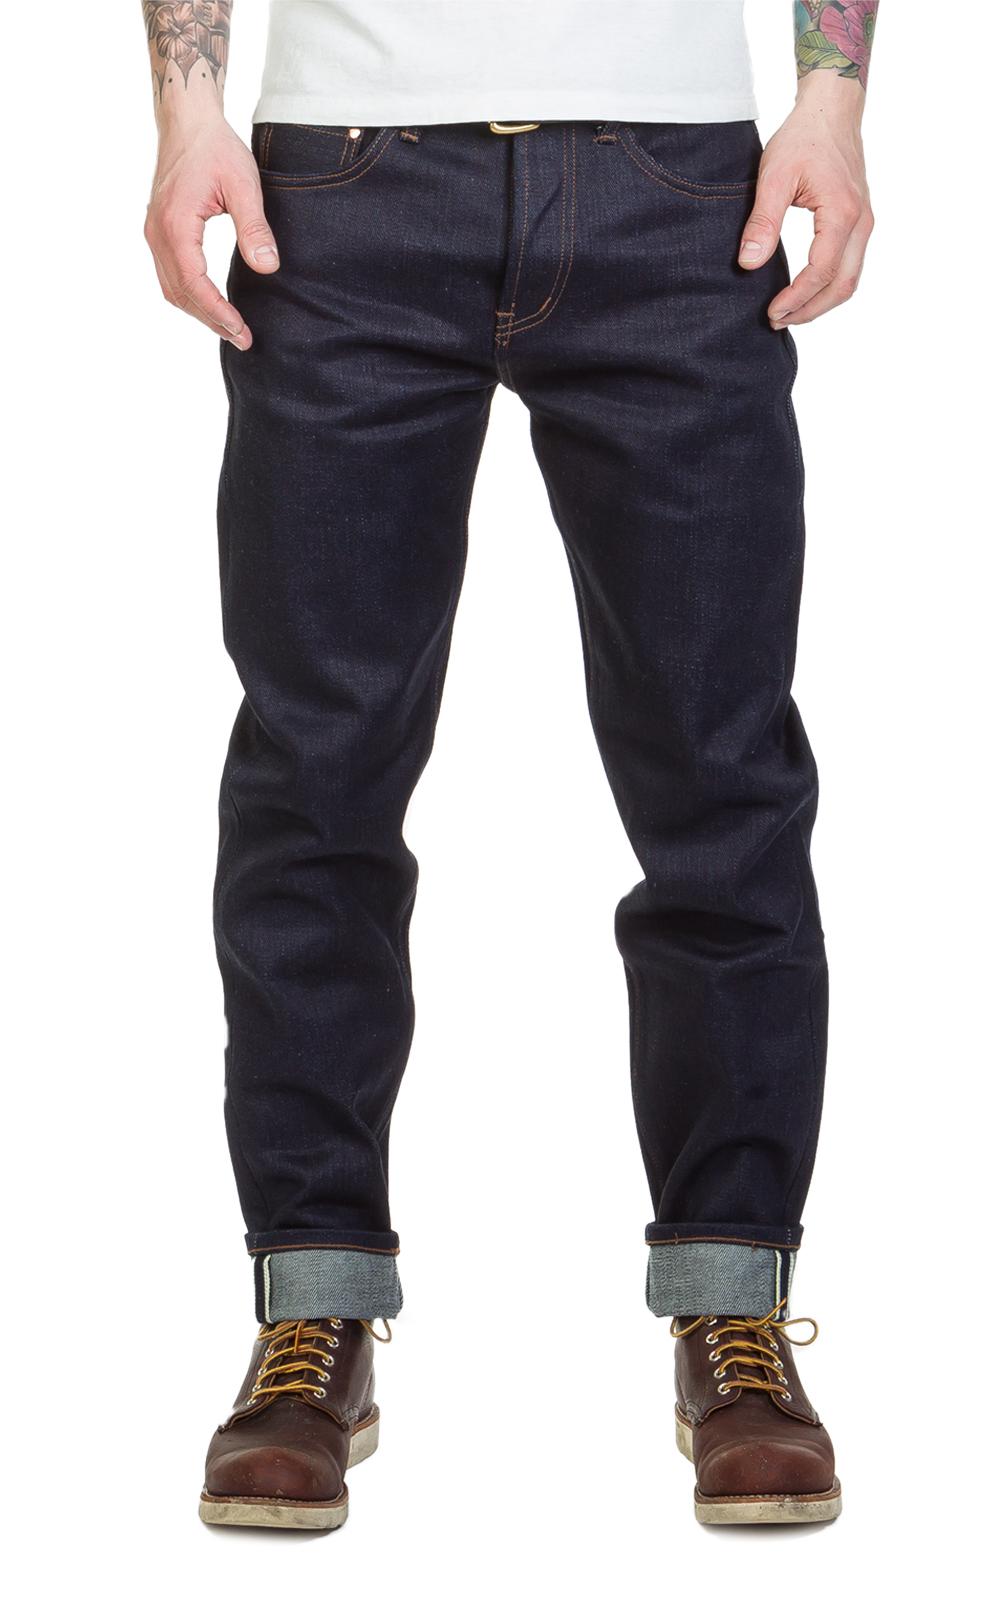 The Unbranded Brand Denim Unbranded Ub621 Relaxed Tapered Fit Indigo ...